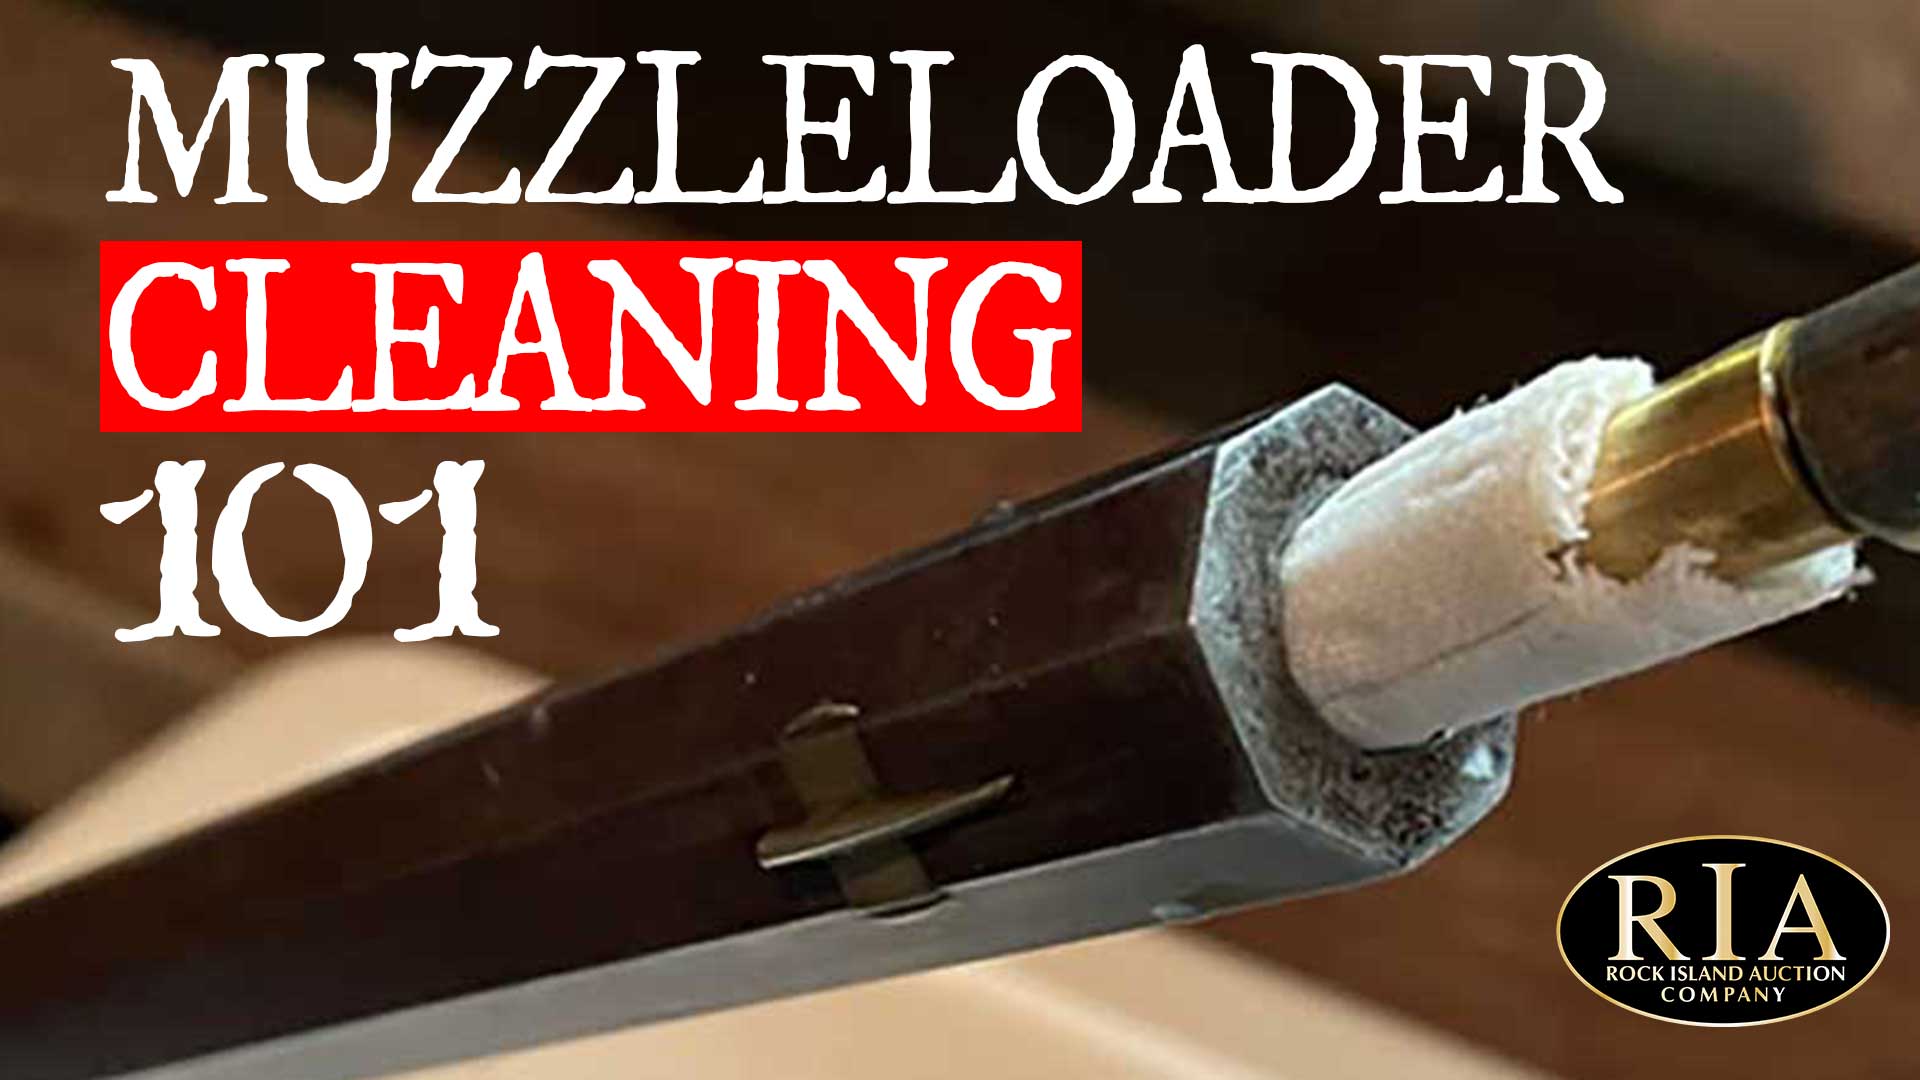 Muzzleloader Cleaning 101